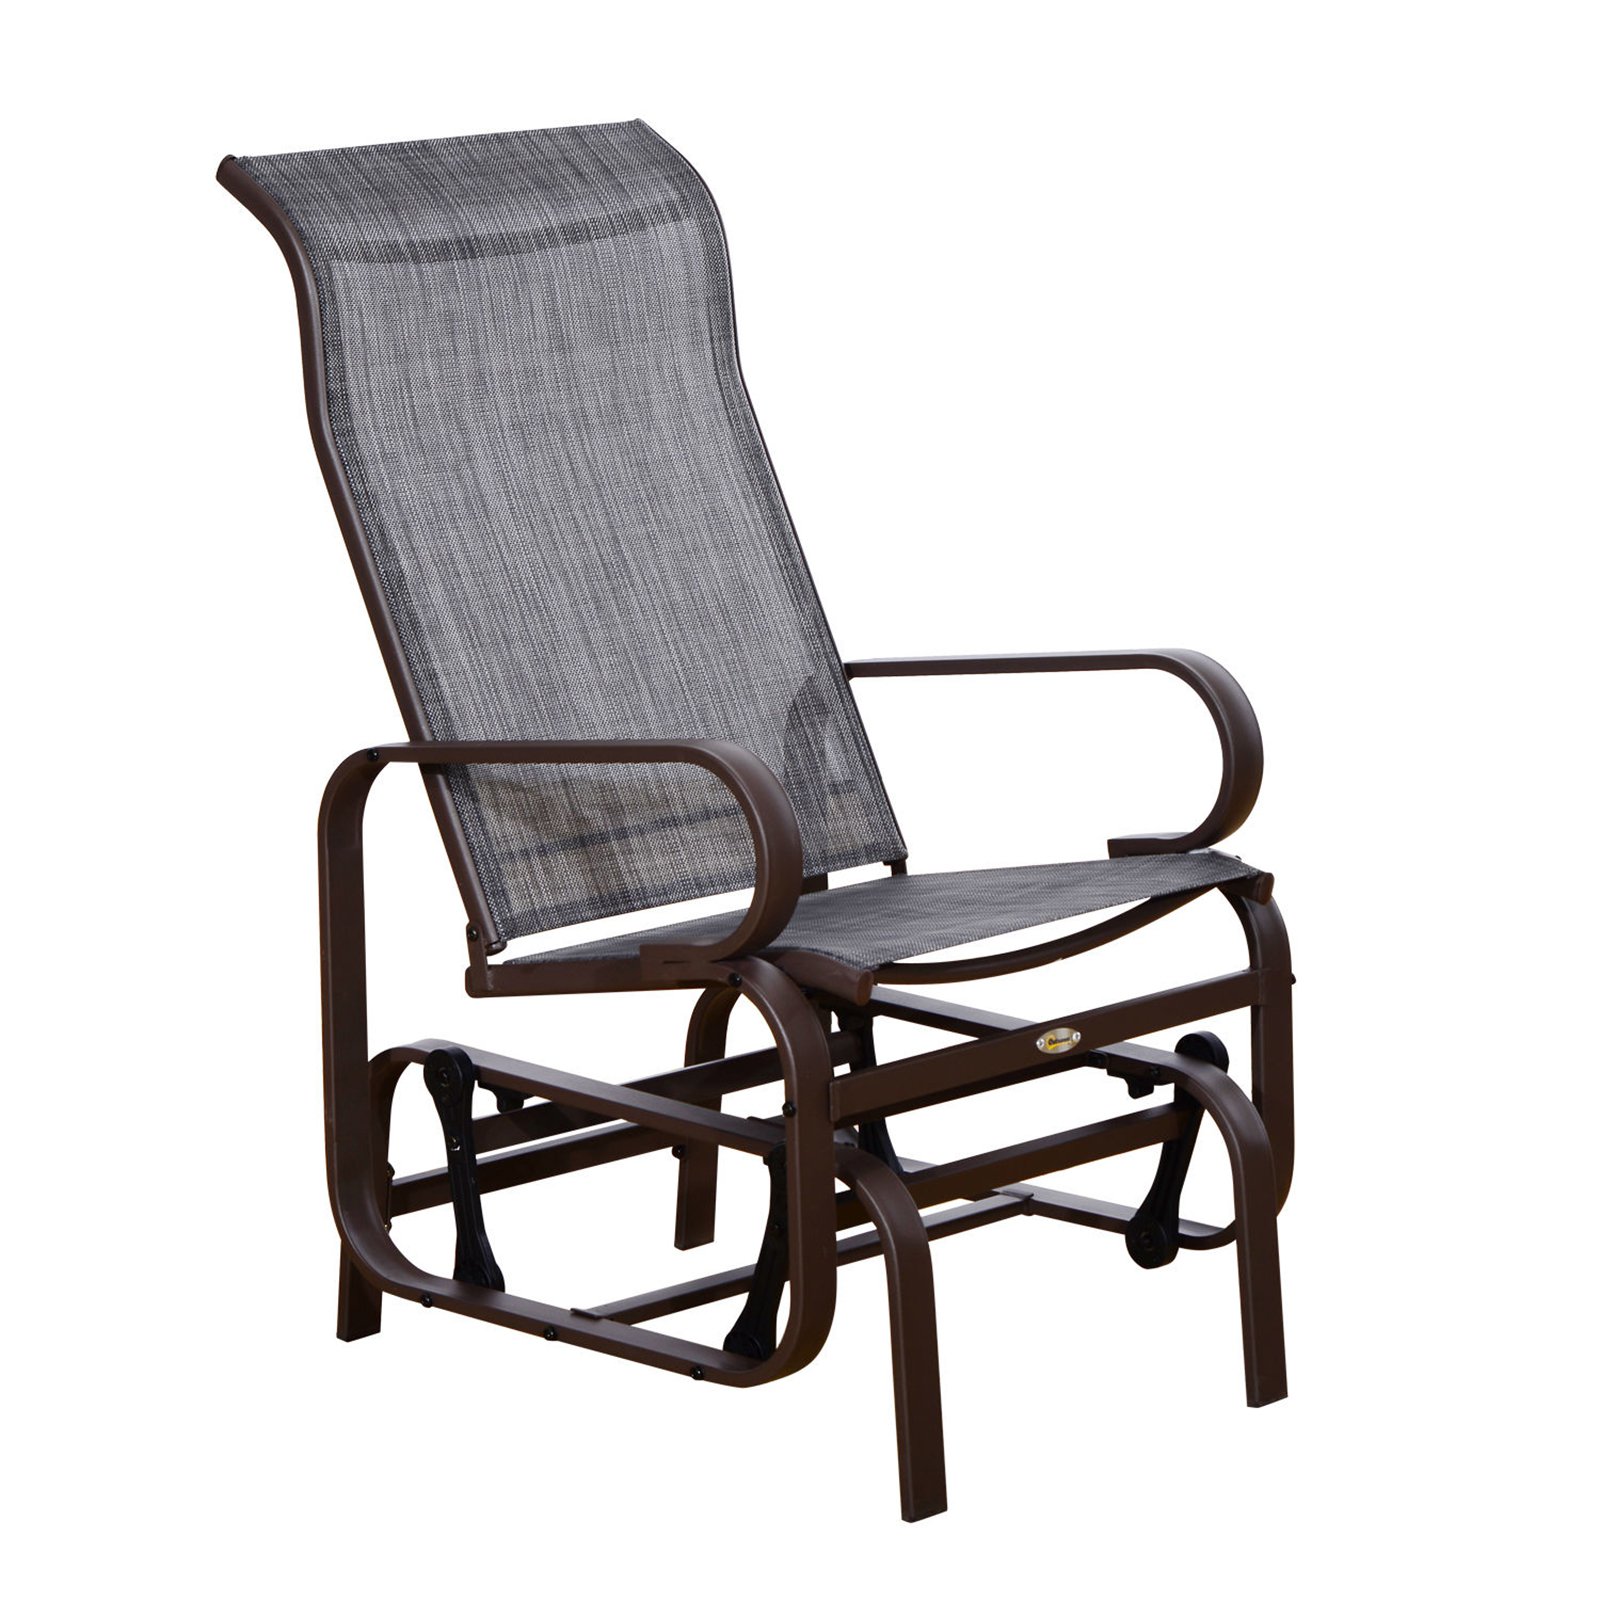 Outsunny Gliding Lounger Chair with Lightweight Construction, Gray - image 2 of 6